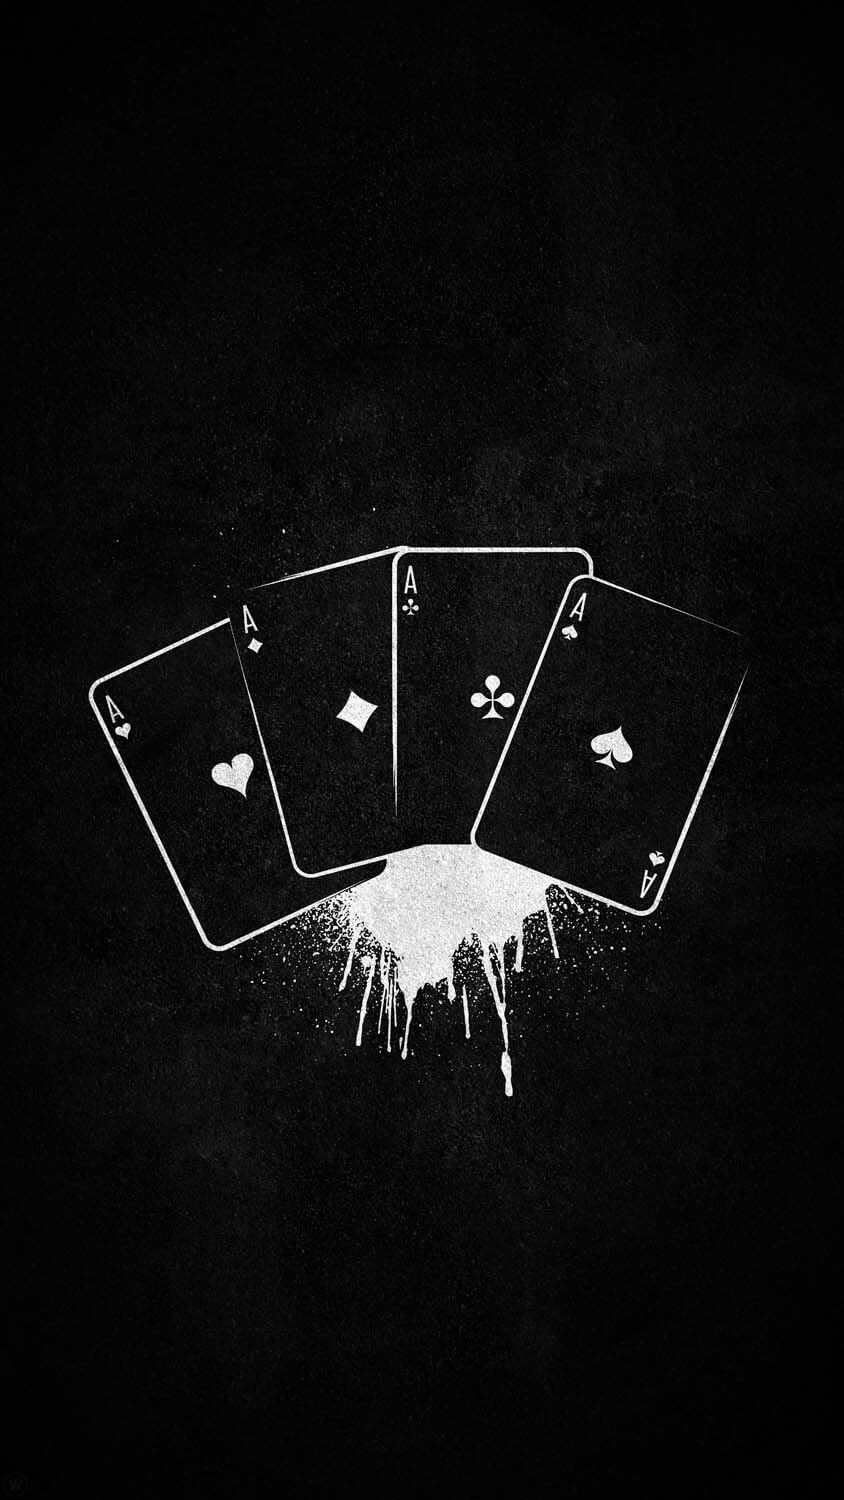 Black Cards IPhone Wallpaper HD - IPhone Wallpapers : iPhone Wallpapers